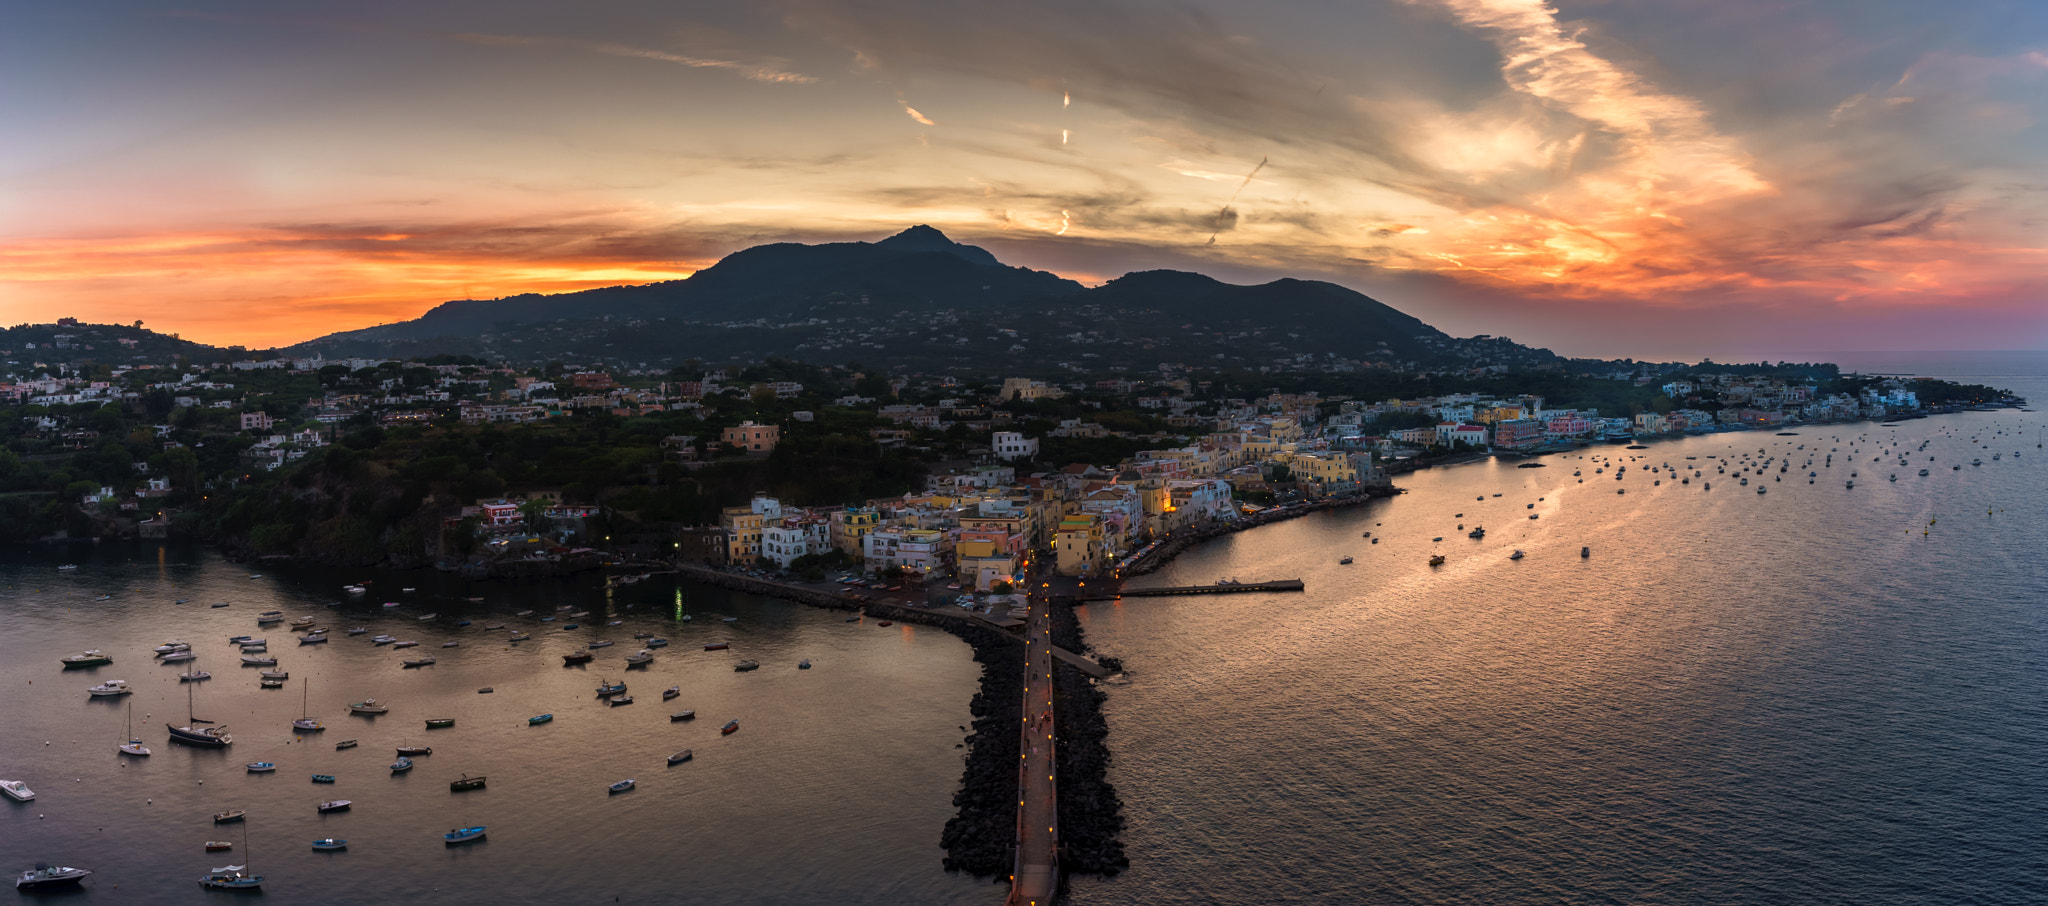 Sony a7 + ZEISS Batis 25mm F2 sample photo. Through the eyes of castello aragonese photography